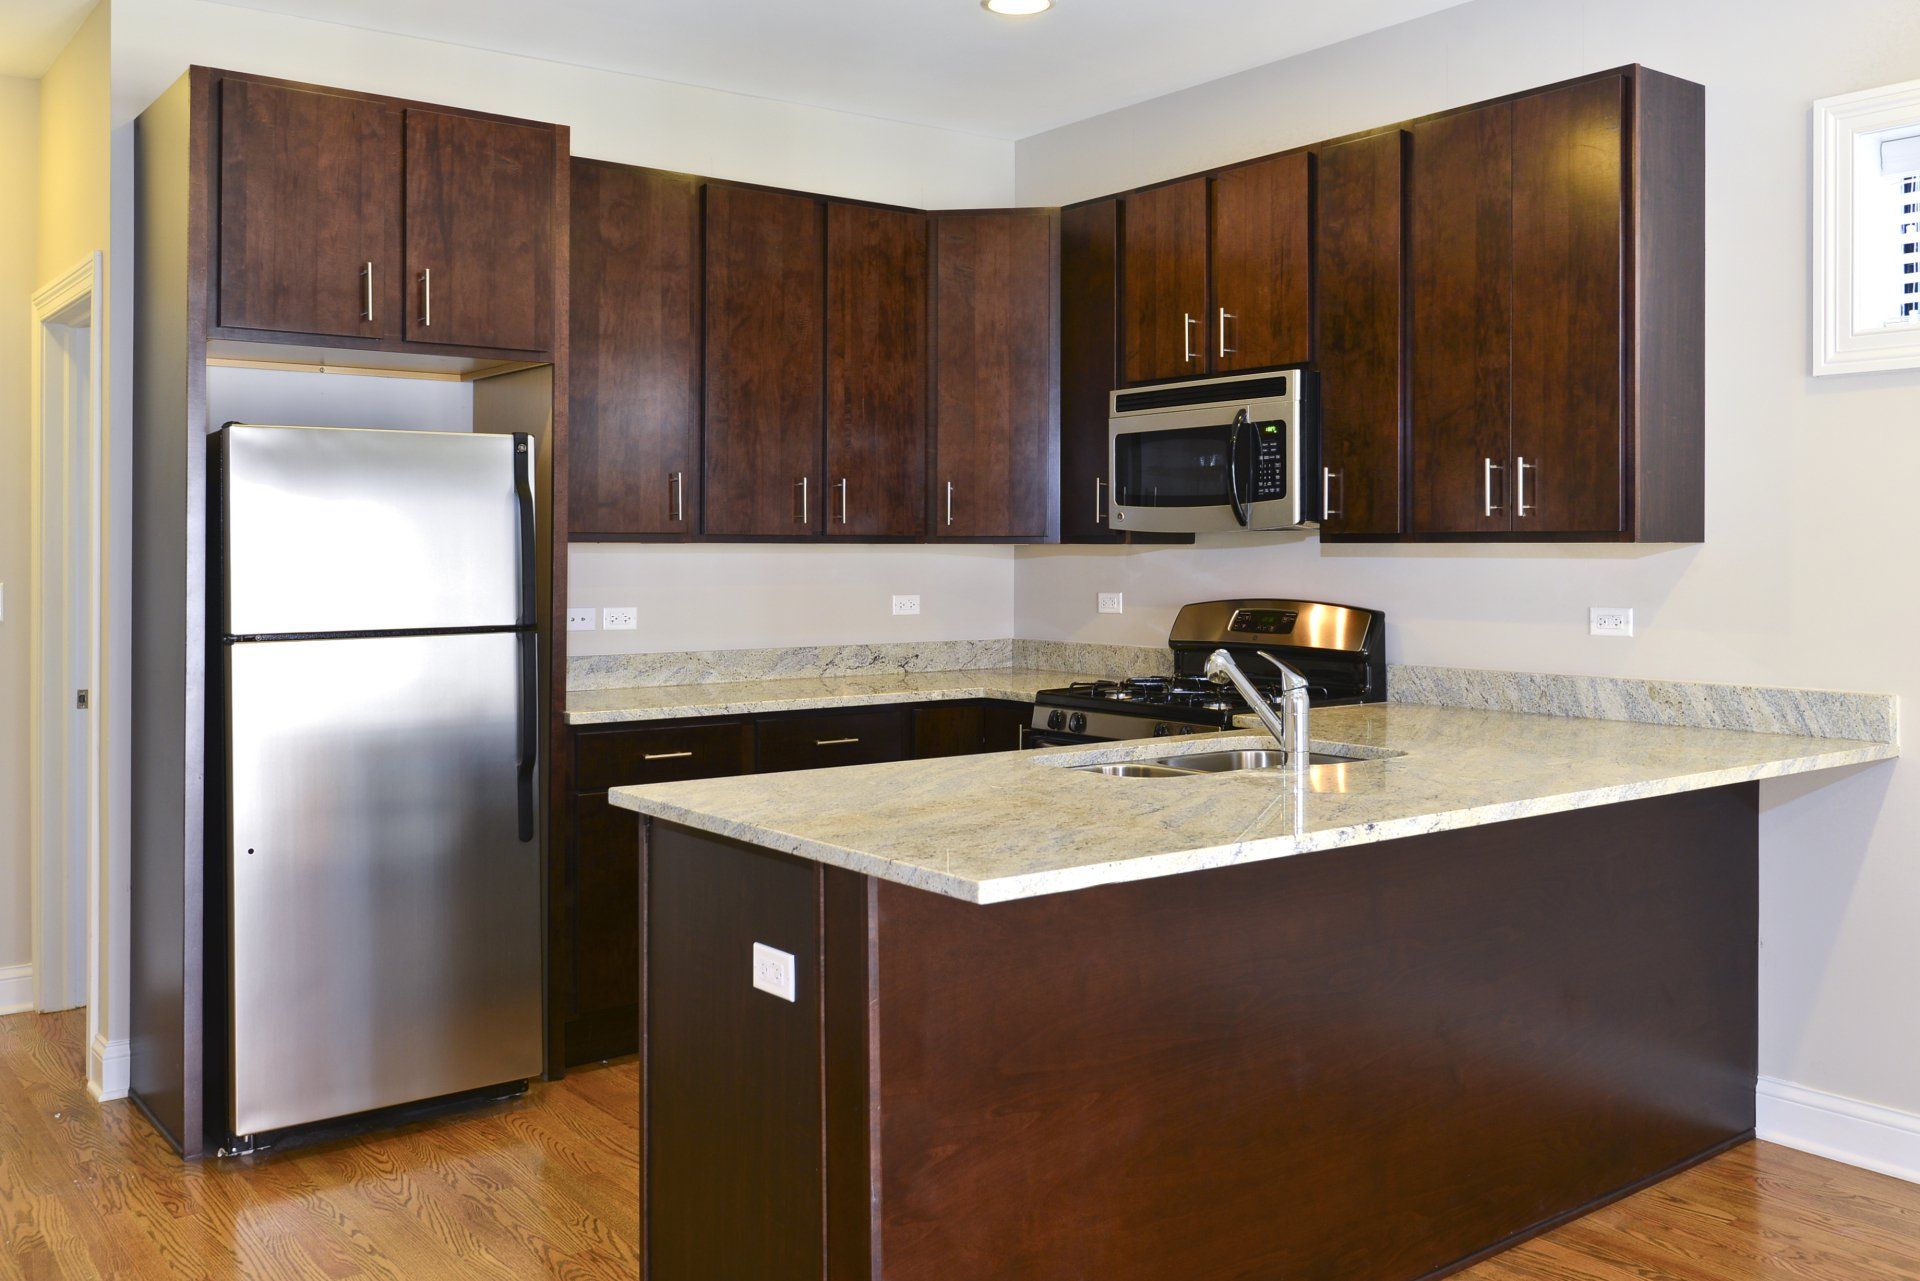 Kitchen with spacious countertops at The Belmont by Reside Flats.